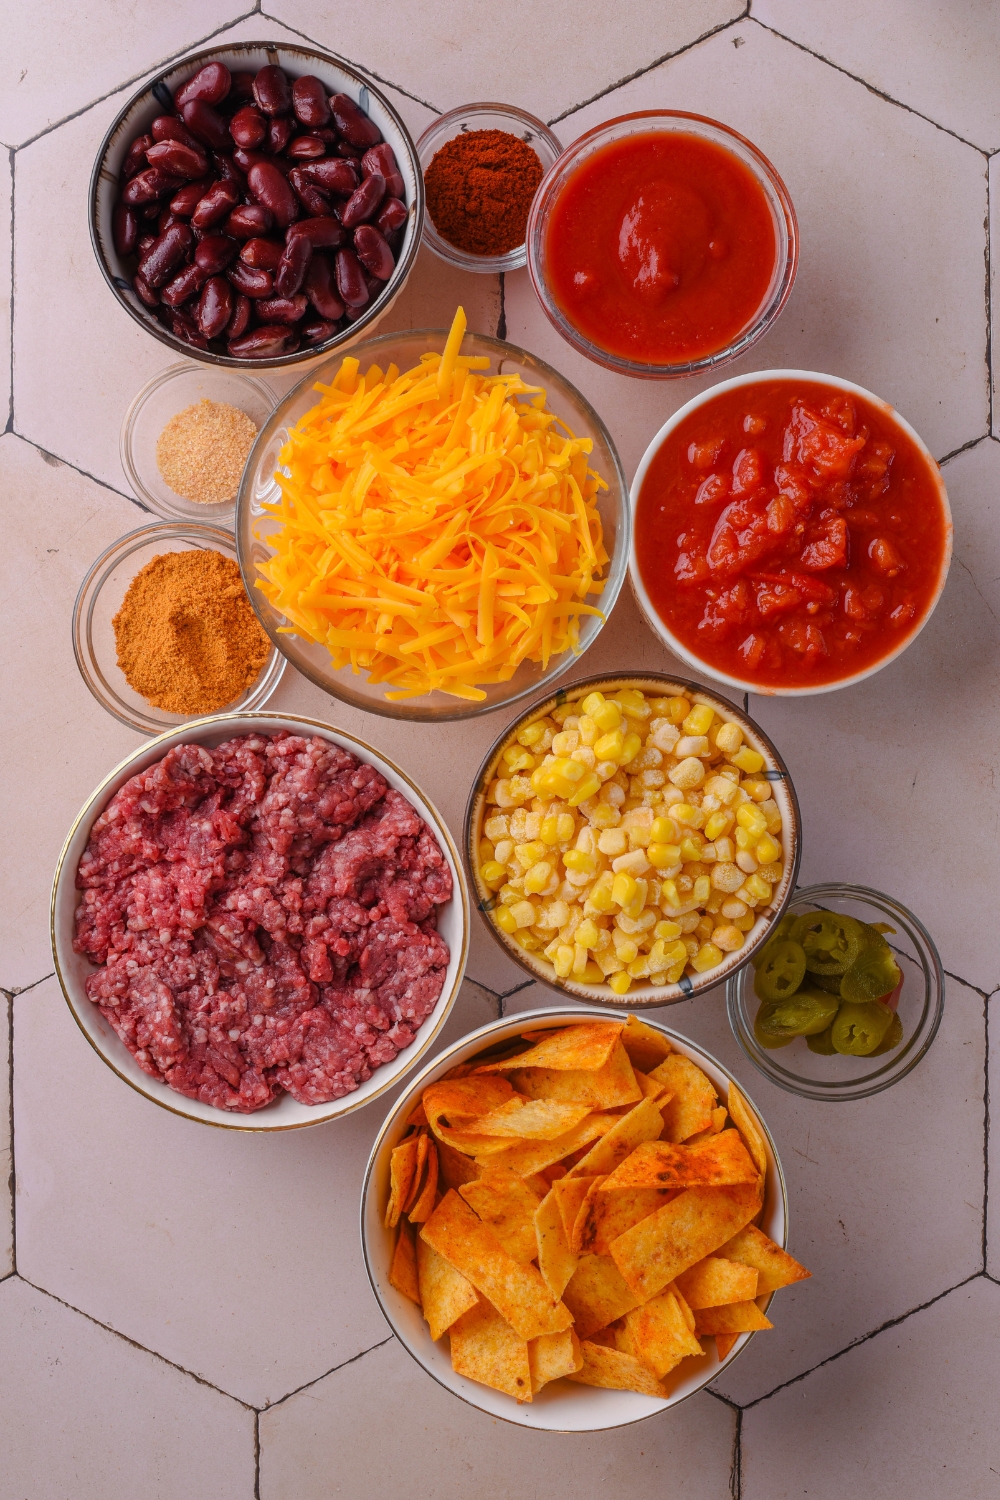 An assortment of ingredients including bowls of raw ground beef, shredded cheese, Fritos corn chips, corn, tomato sauce, beans, jalapeños, and spices.